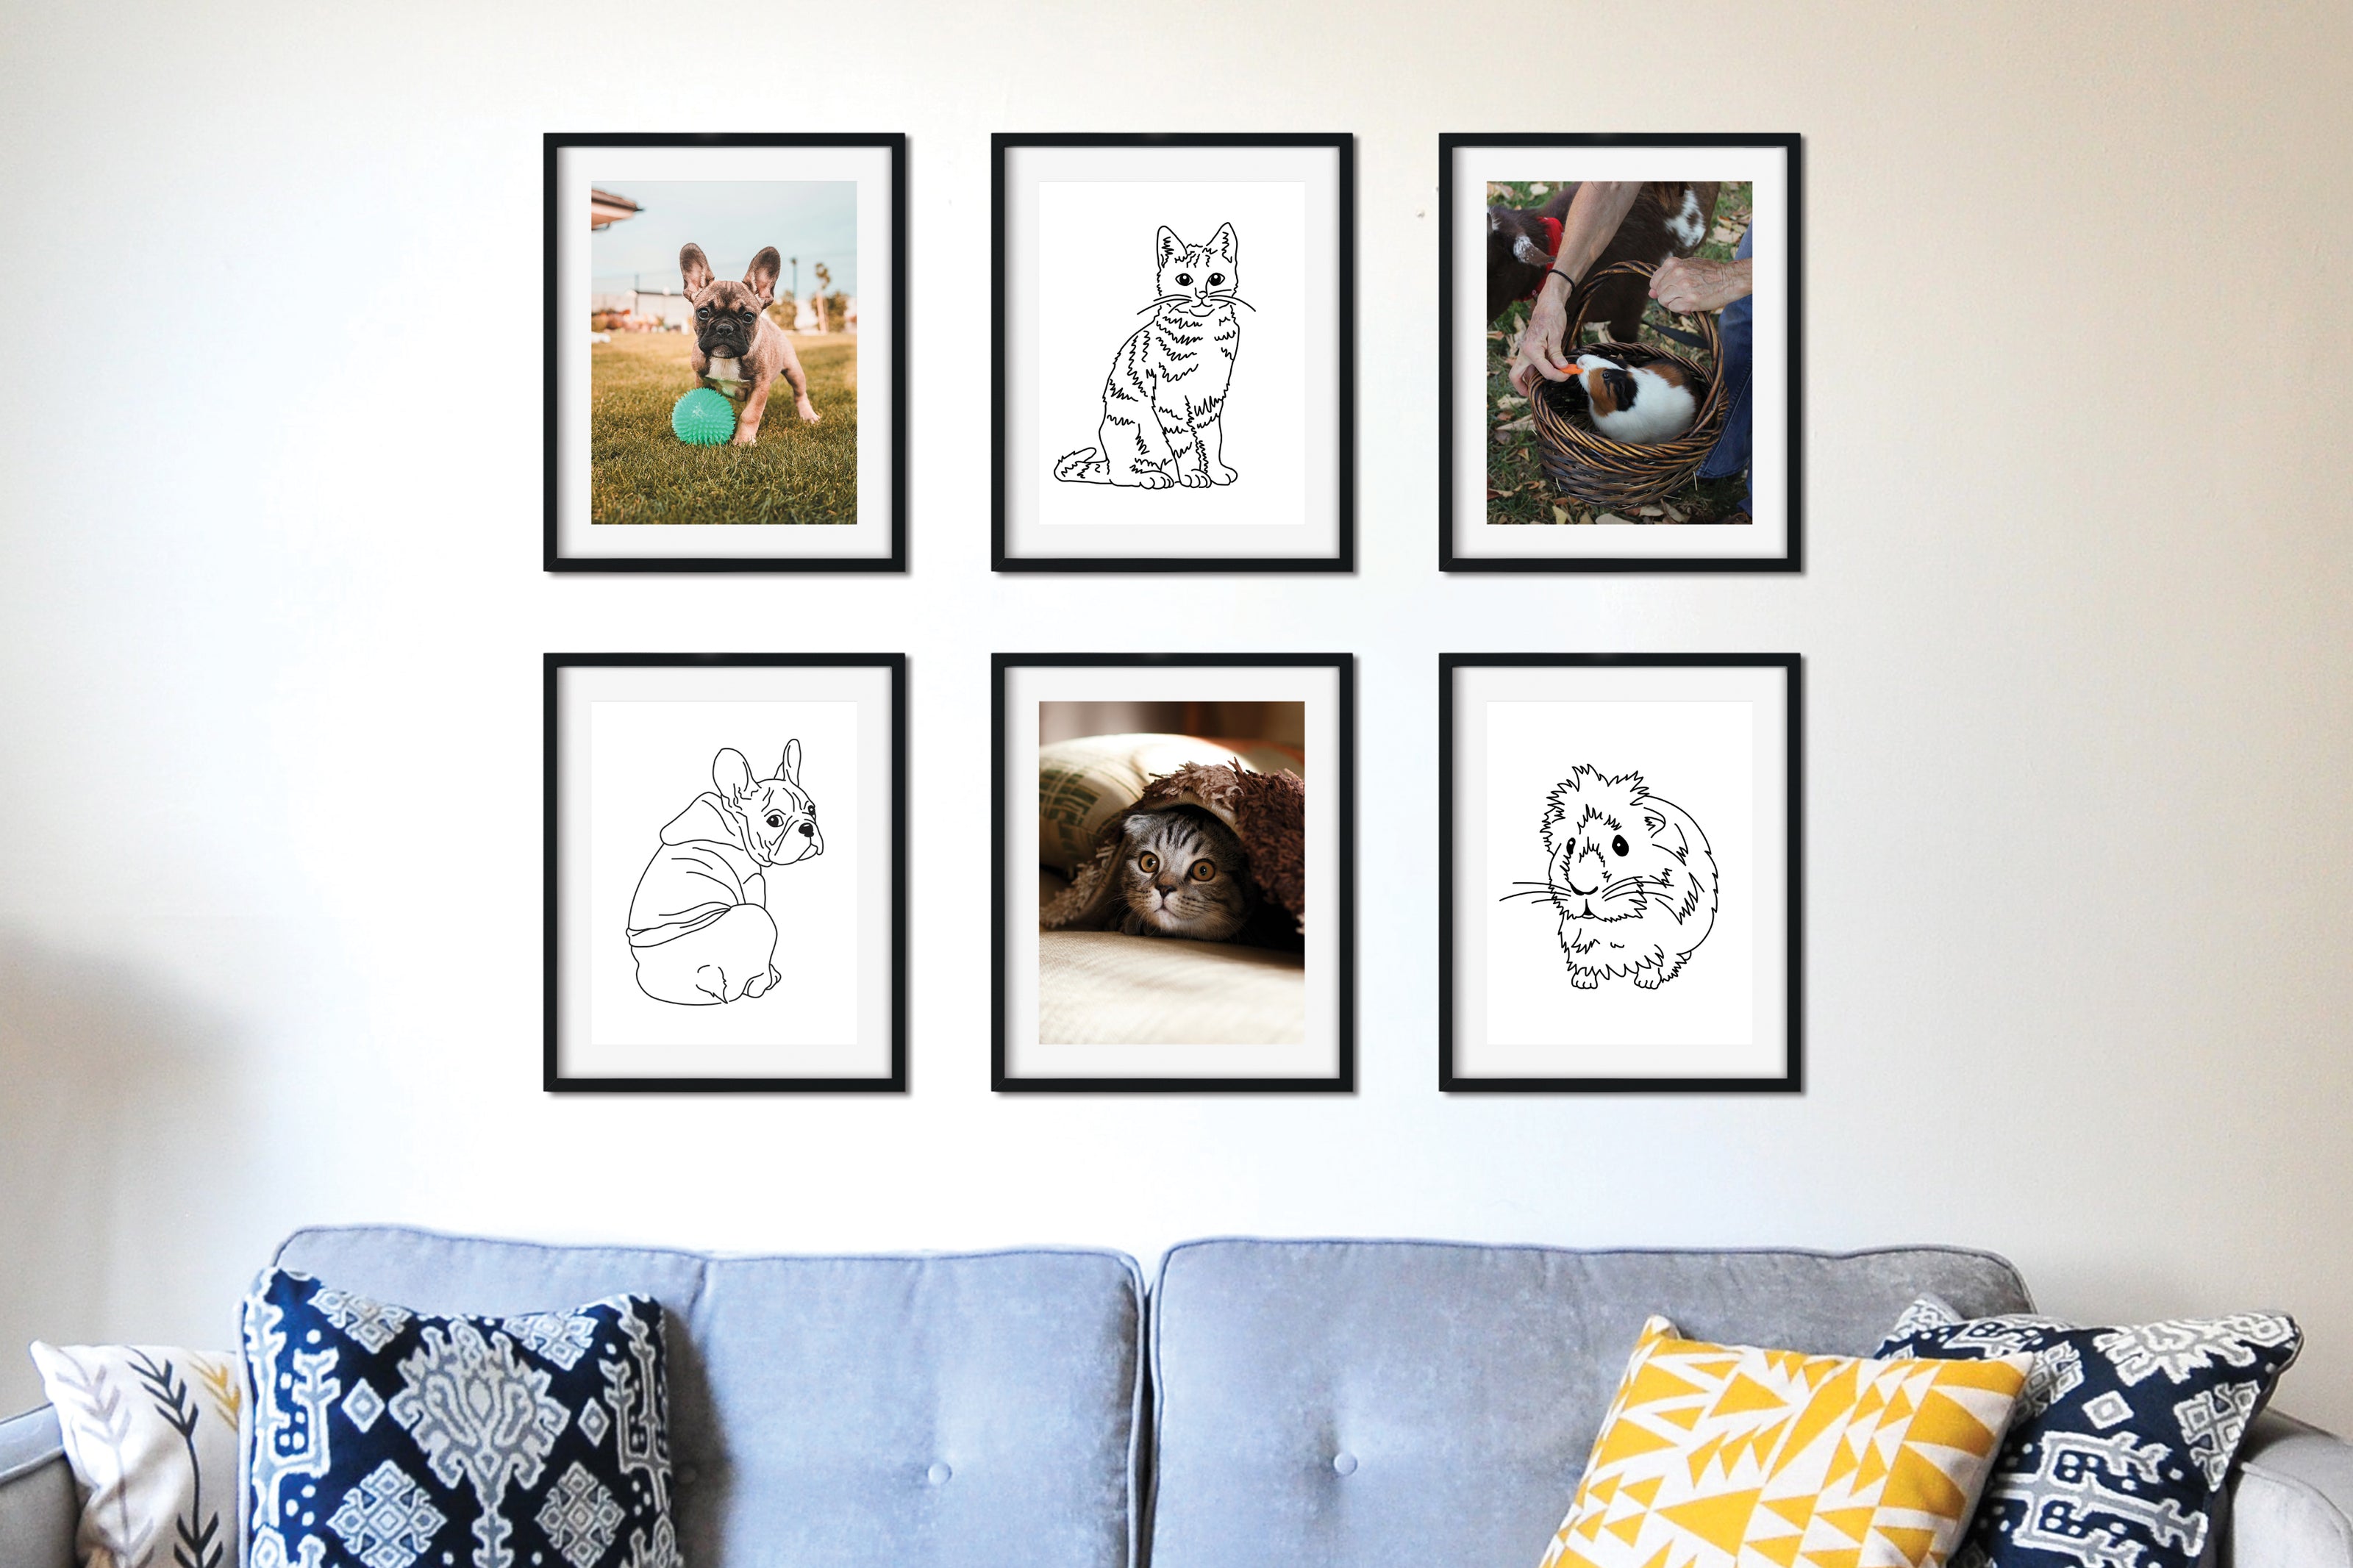 A group of six framed drawings of pets and photos on a wall above a couch with pillows.